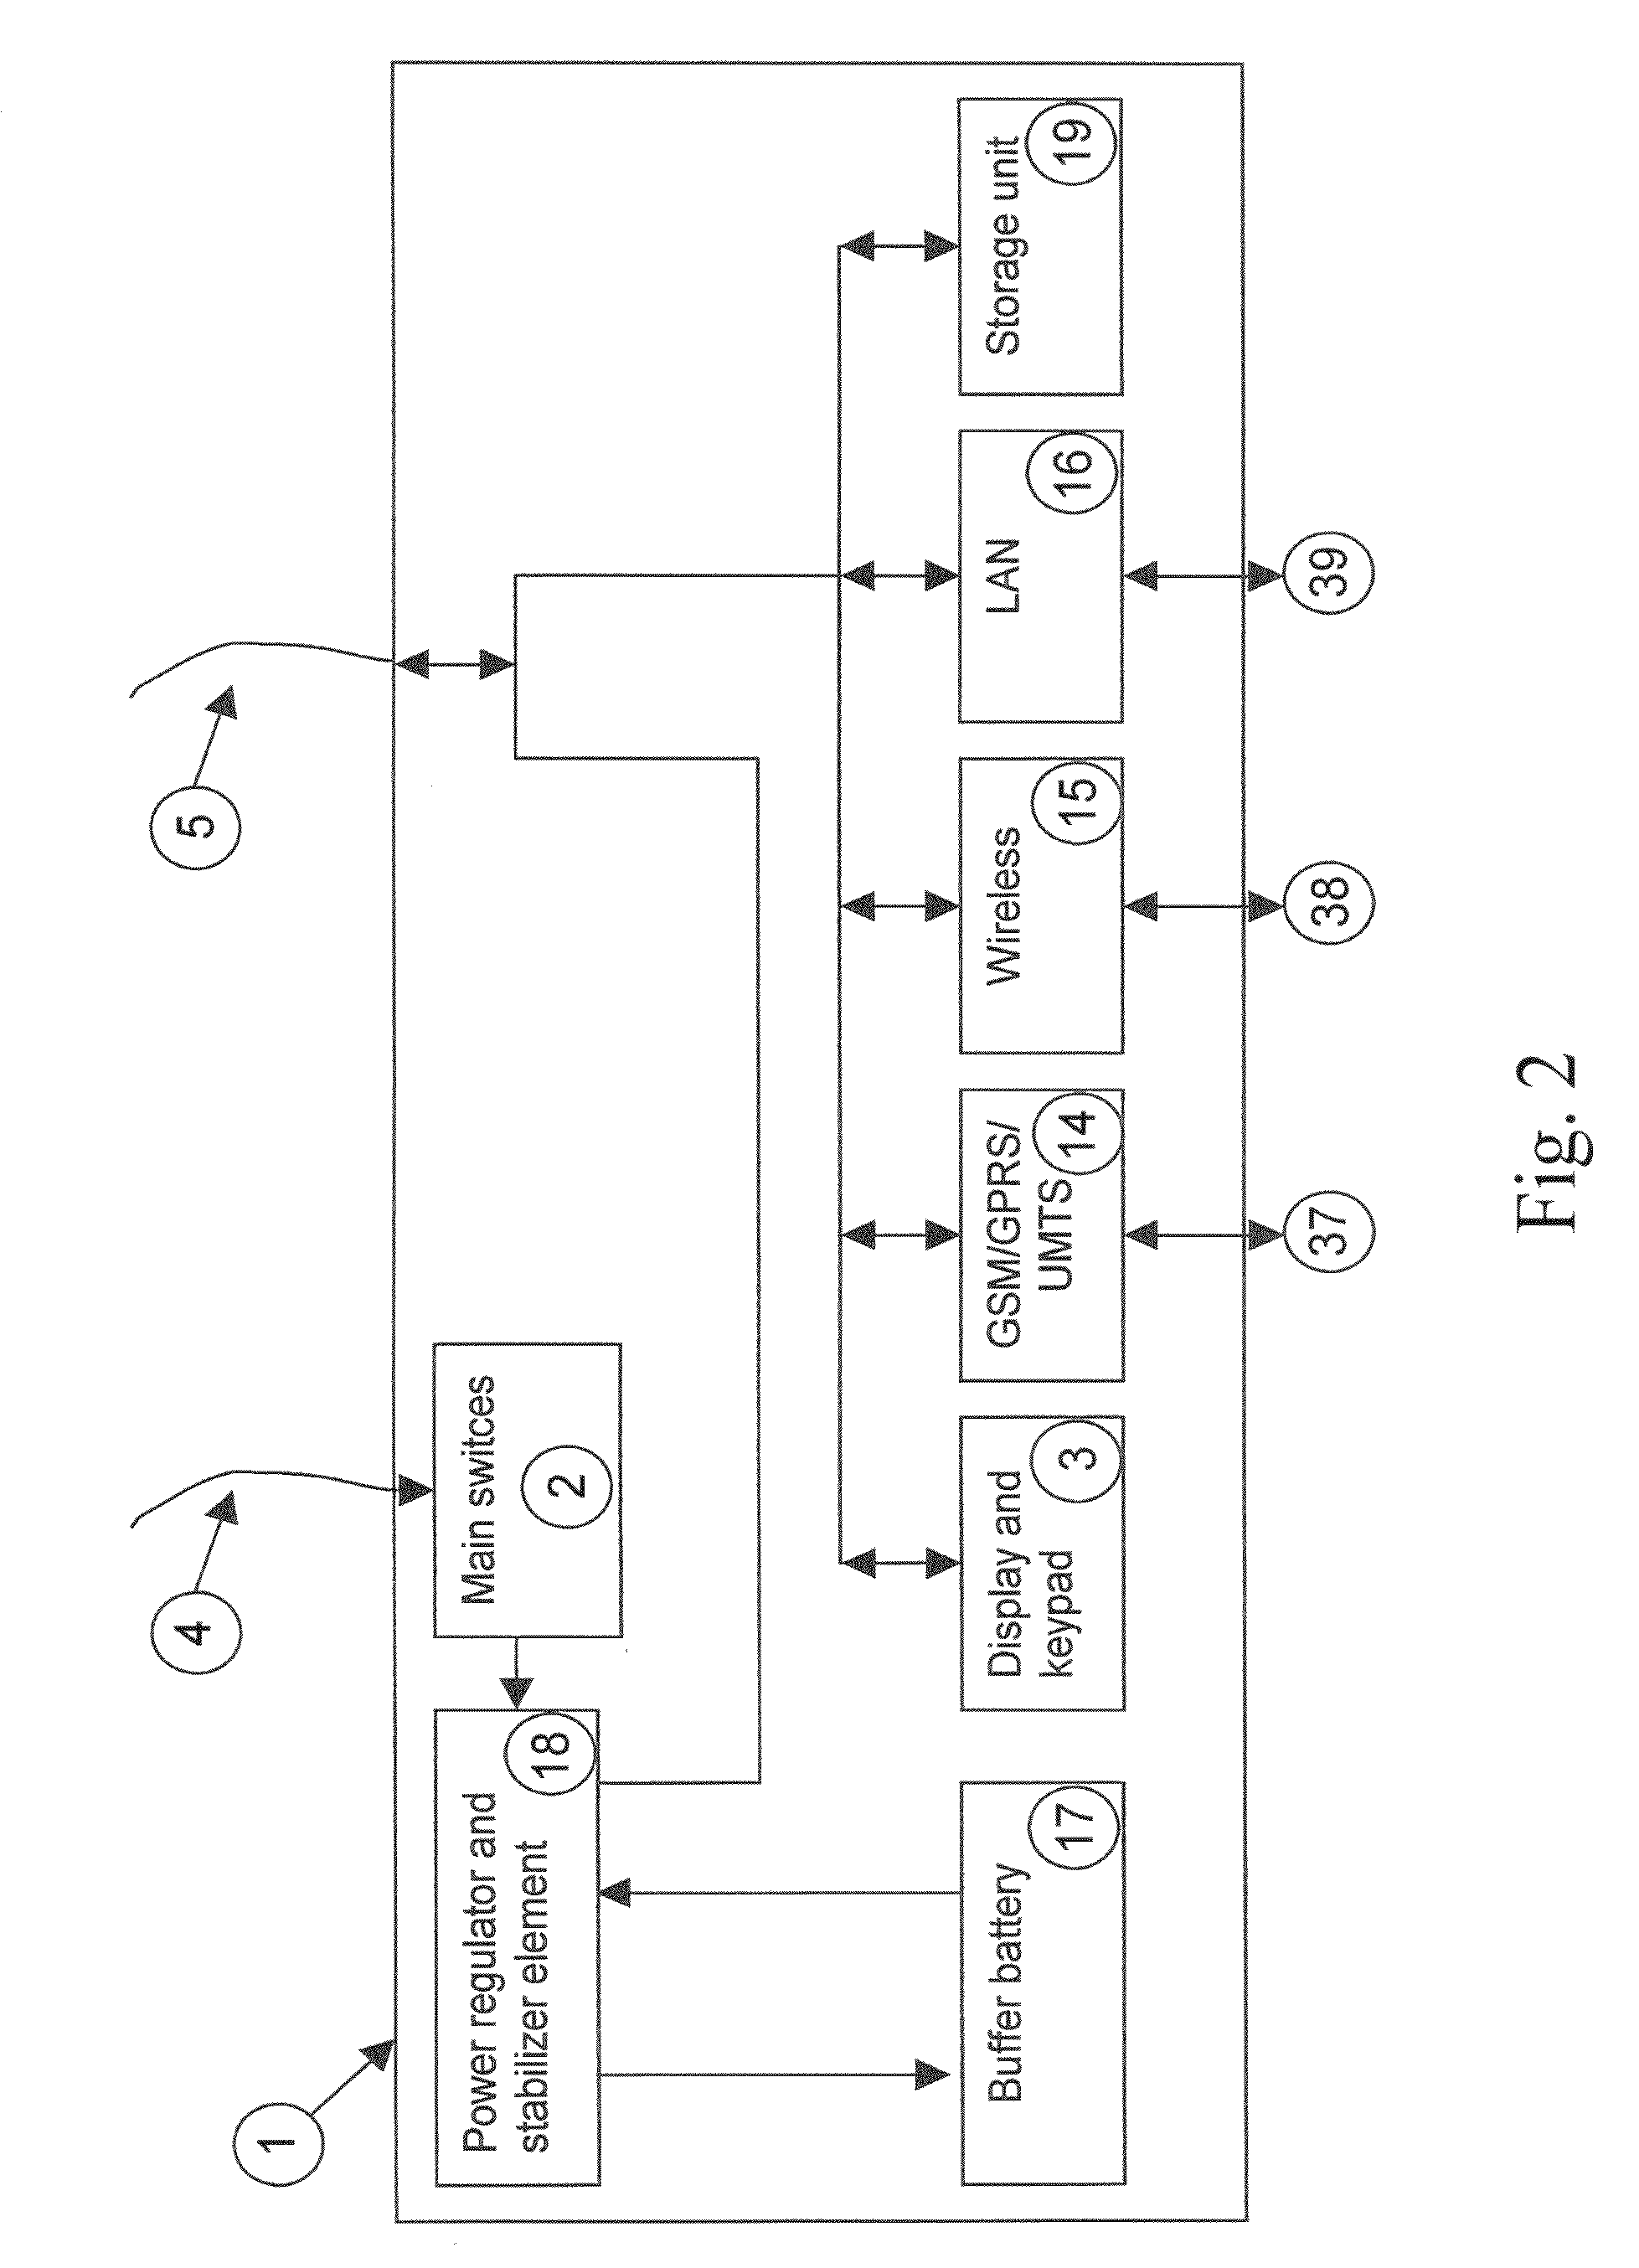 Synthetic-aperture radar system and operating method for monitoring ground and structure displacements suitable for emergency conditions